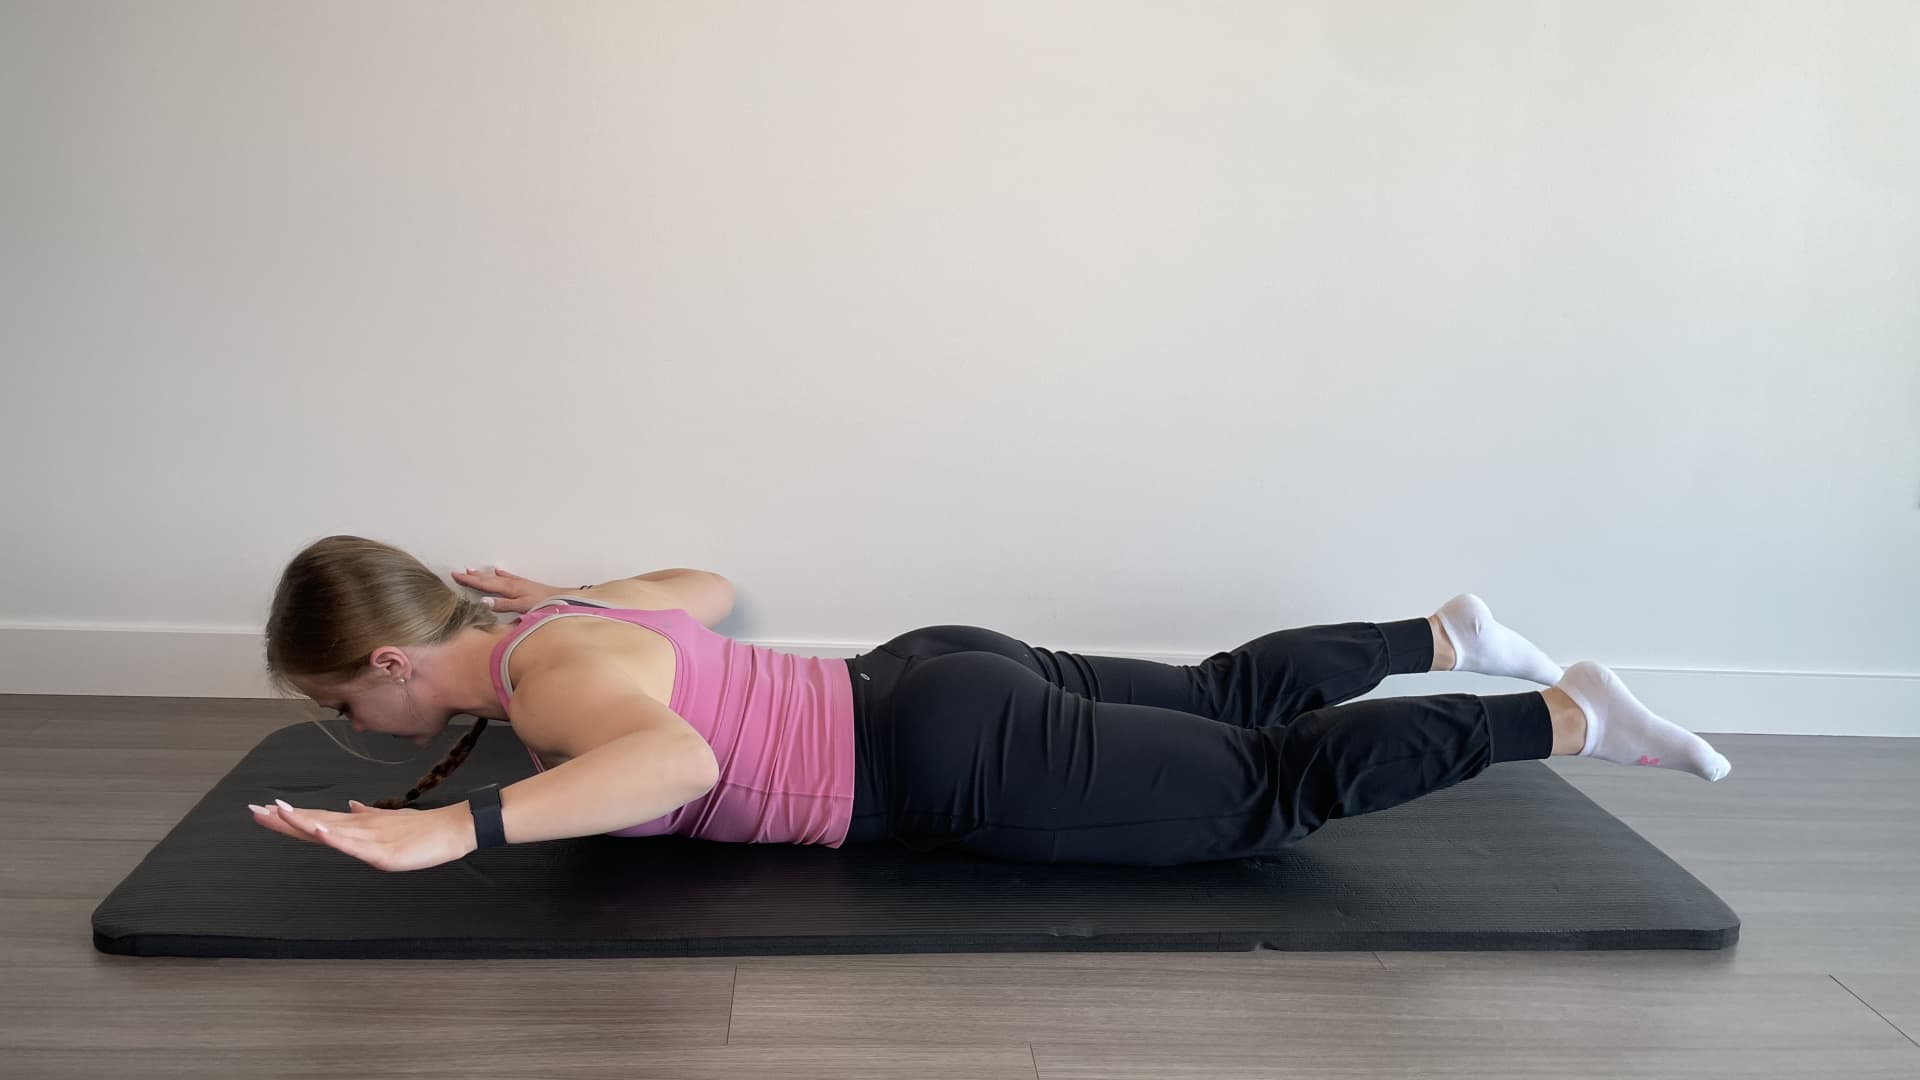 This exercise strengthens your entire posterior chain, which is made up of every muscle in the back part of the body.